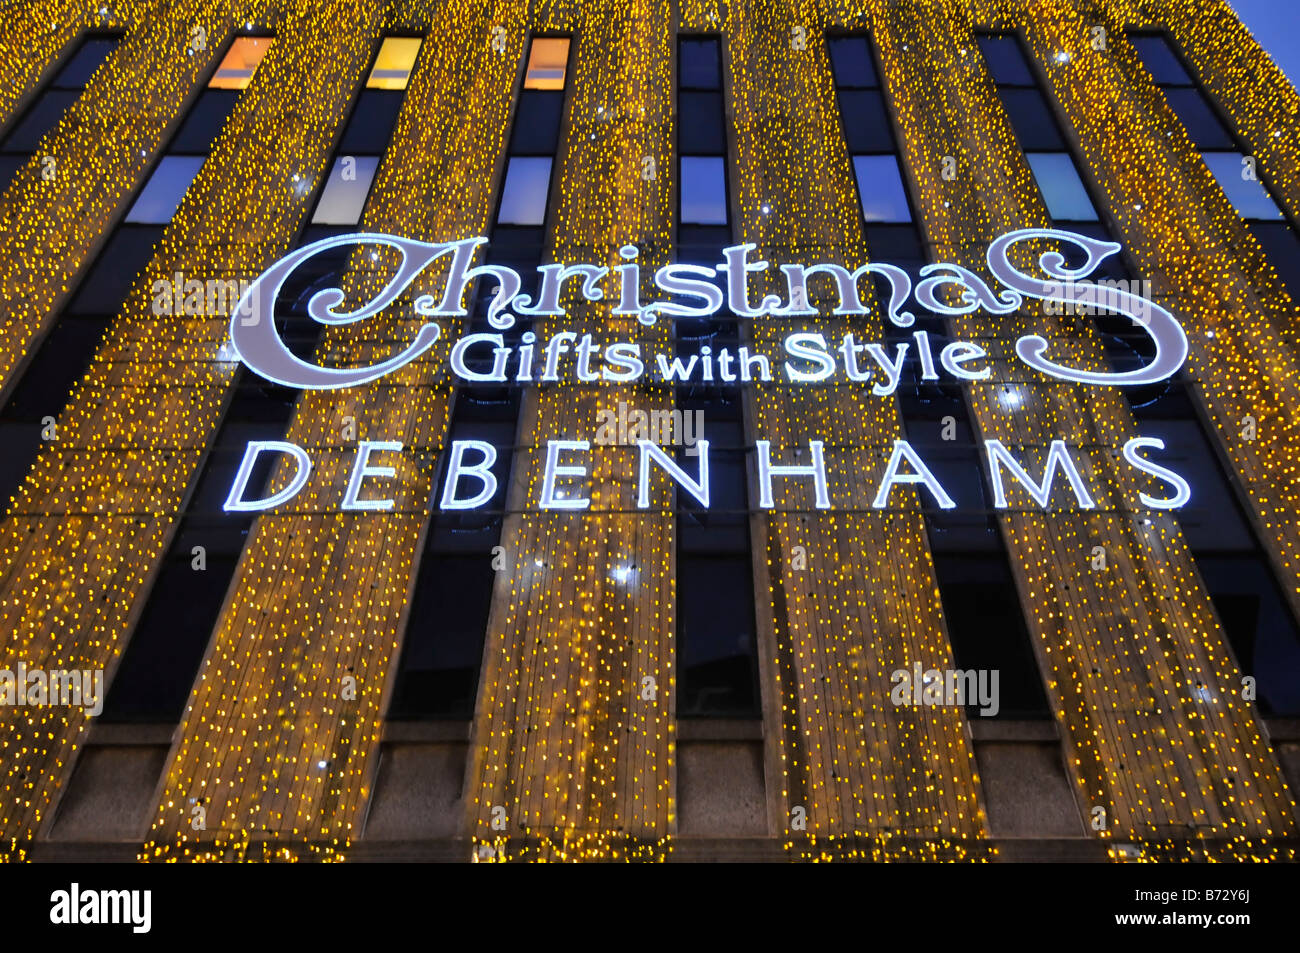 Debenhams department store Oxford street with Christmas lights in Londons West End Stock Photo